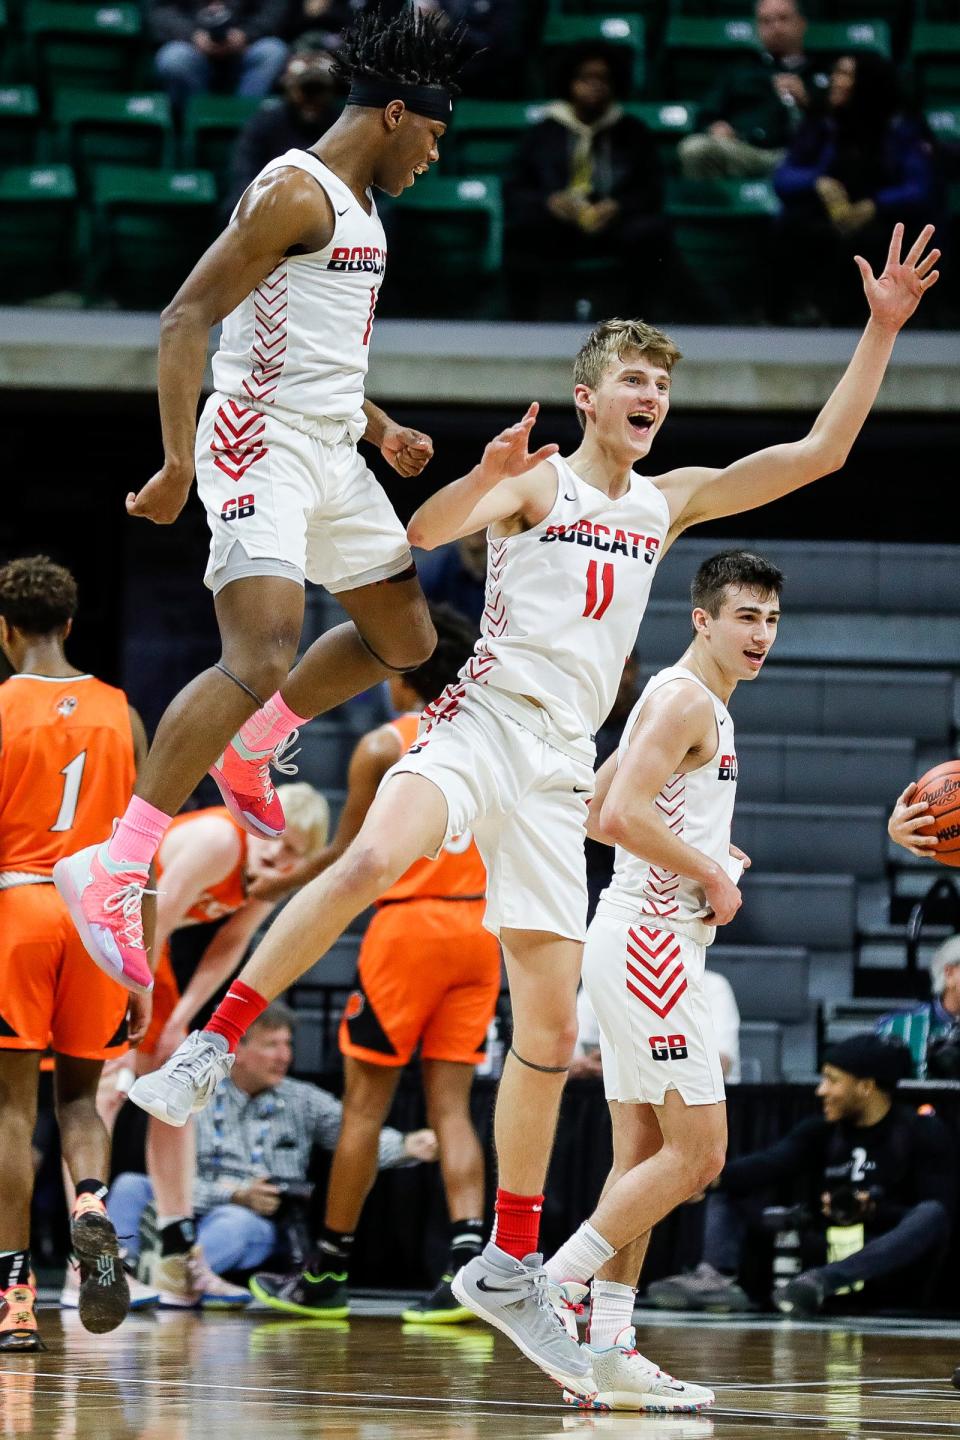 Grand Blanc's Bryce O'Mara (11) celebrates a basket against Belleville with teammate Tae Boyd during the first half of an MHSAA Division 1 boys basketball state semifinal at Breslin Center in East Lansing on Friday, March 25, 2022.